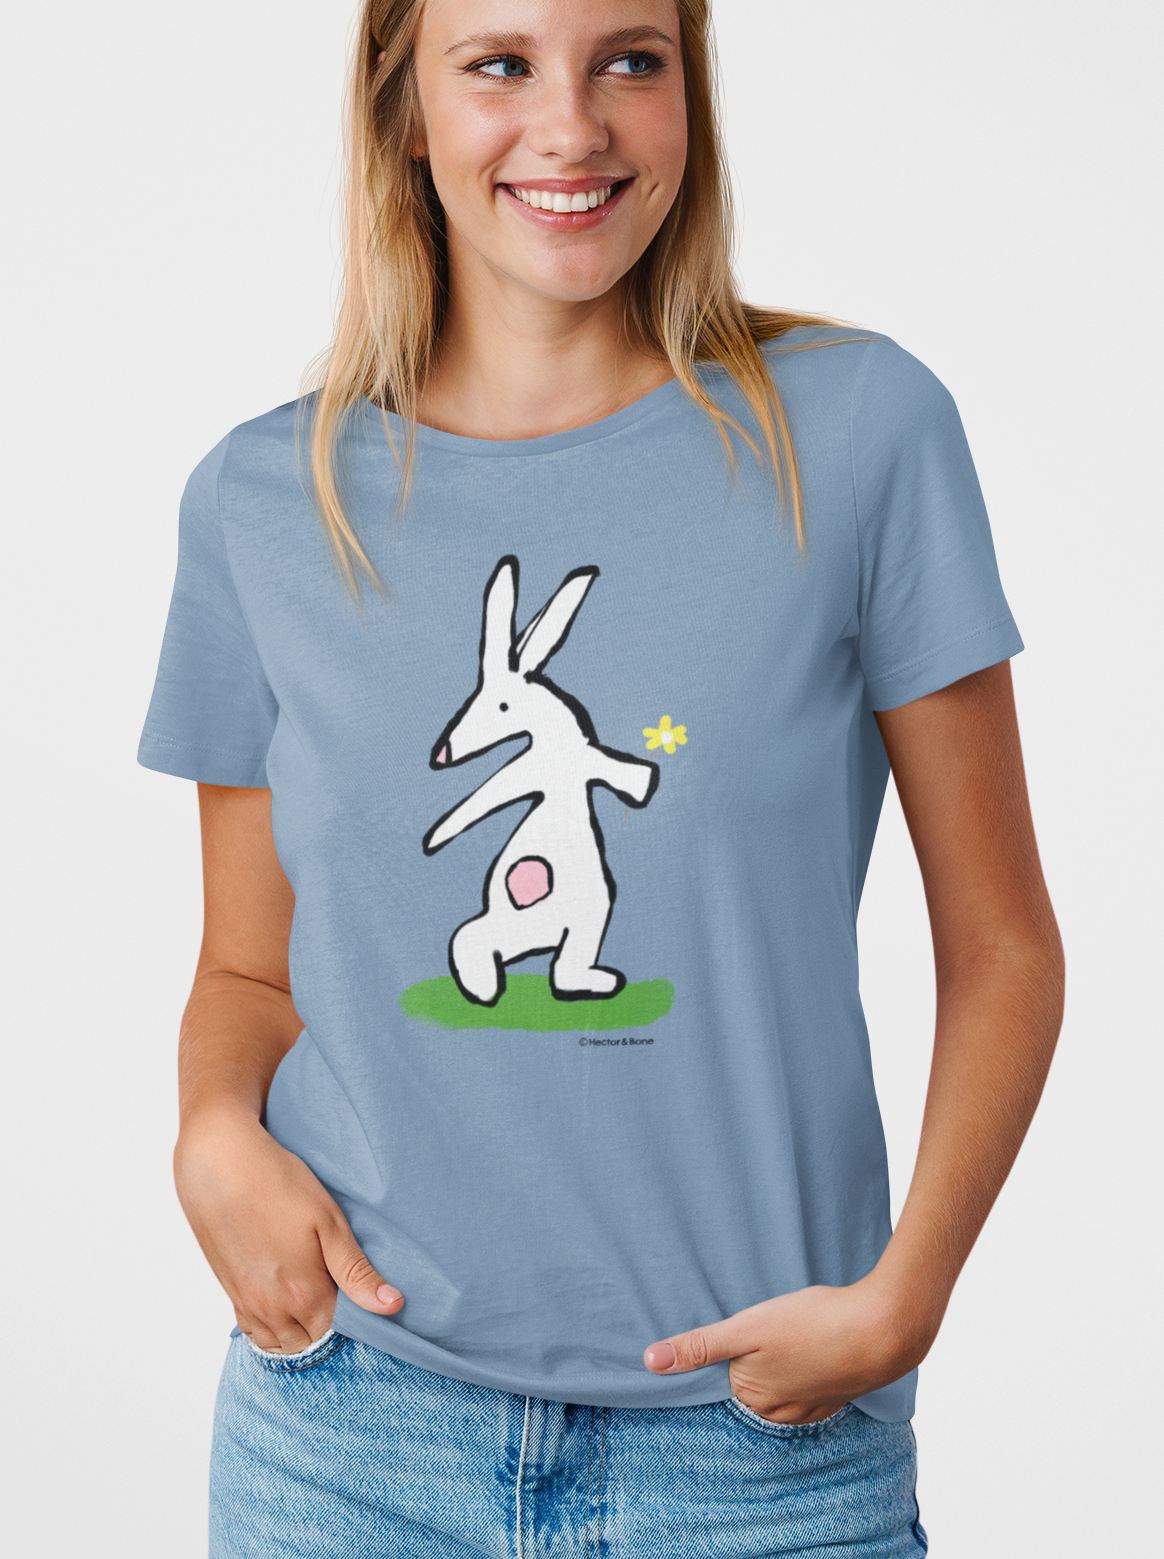 Bunny T-shirt - Young woman wearing Illustrated rabbit holding a flower design on a mid heather blue vegan cotton t-shirt - Easter Bunny t-shirts by Hector and Bone